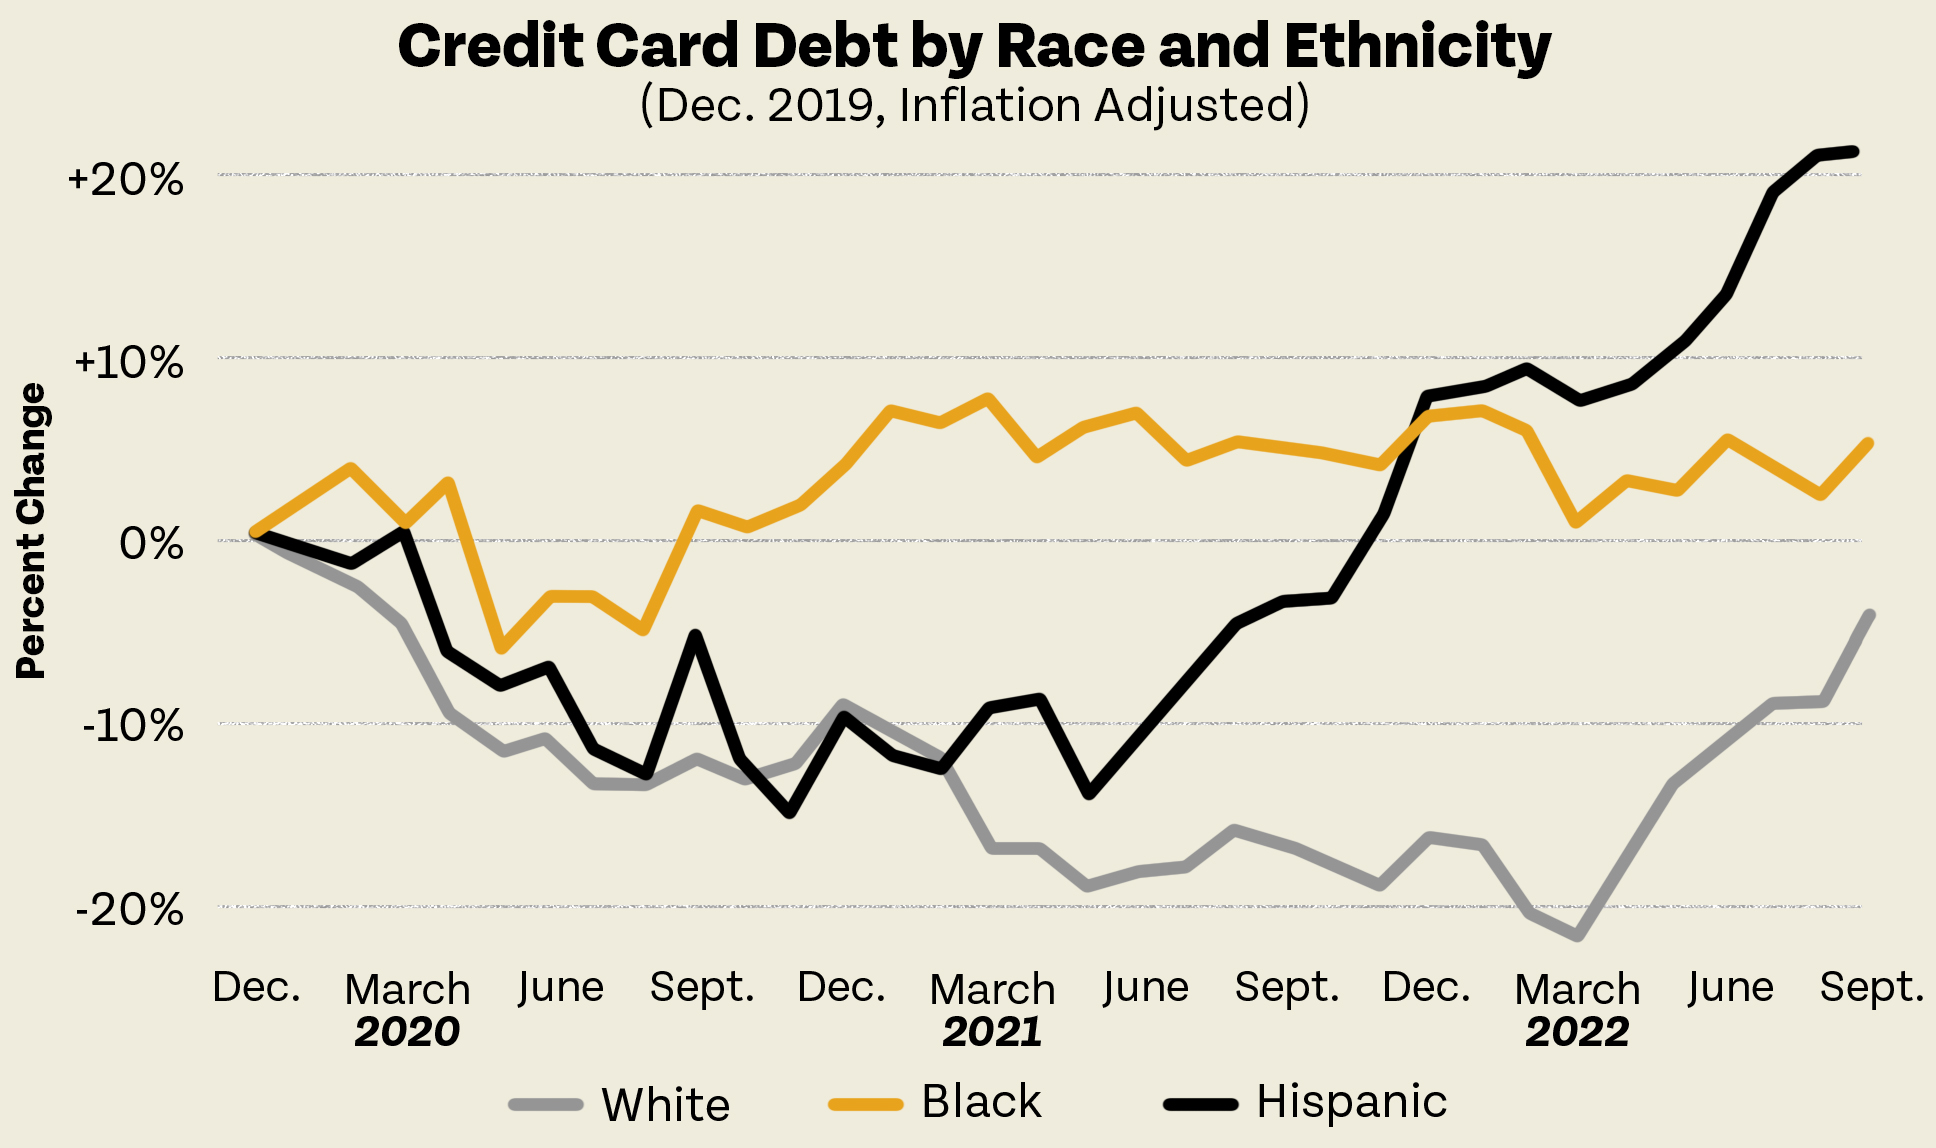 Credit Card Debt by Race and Ethnicity